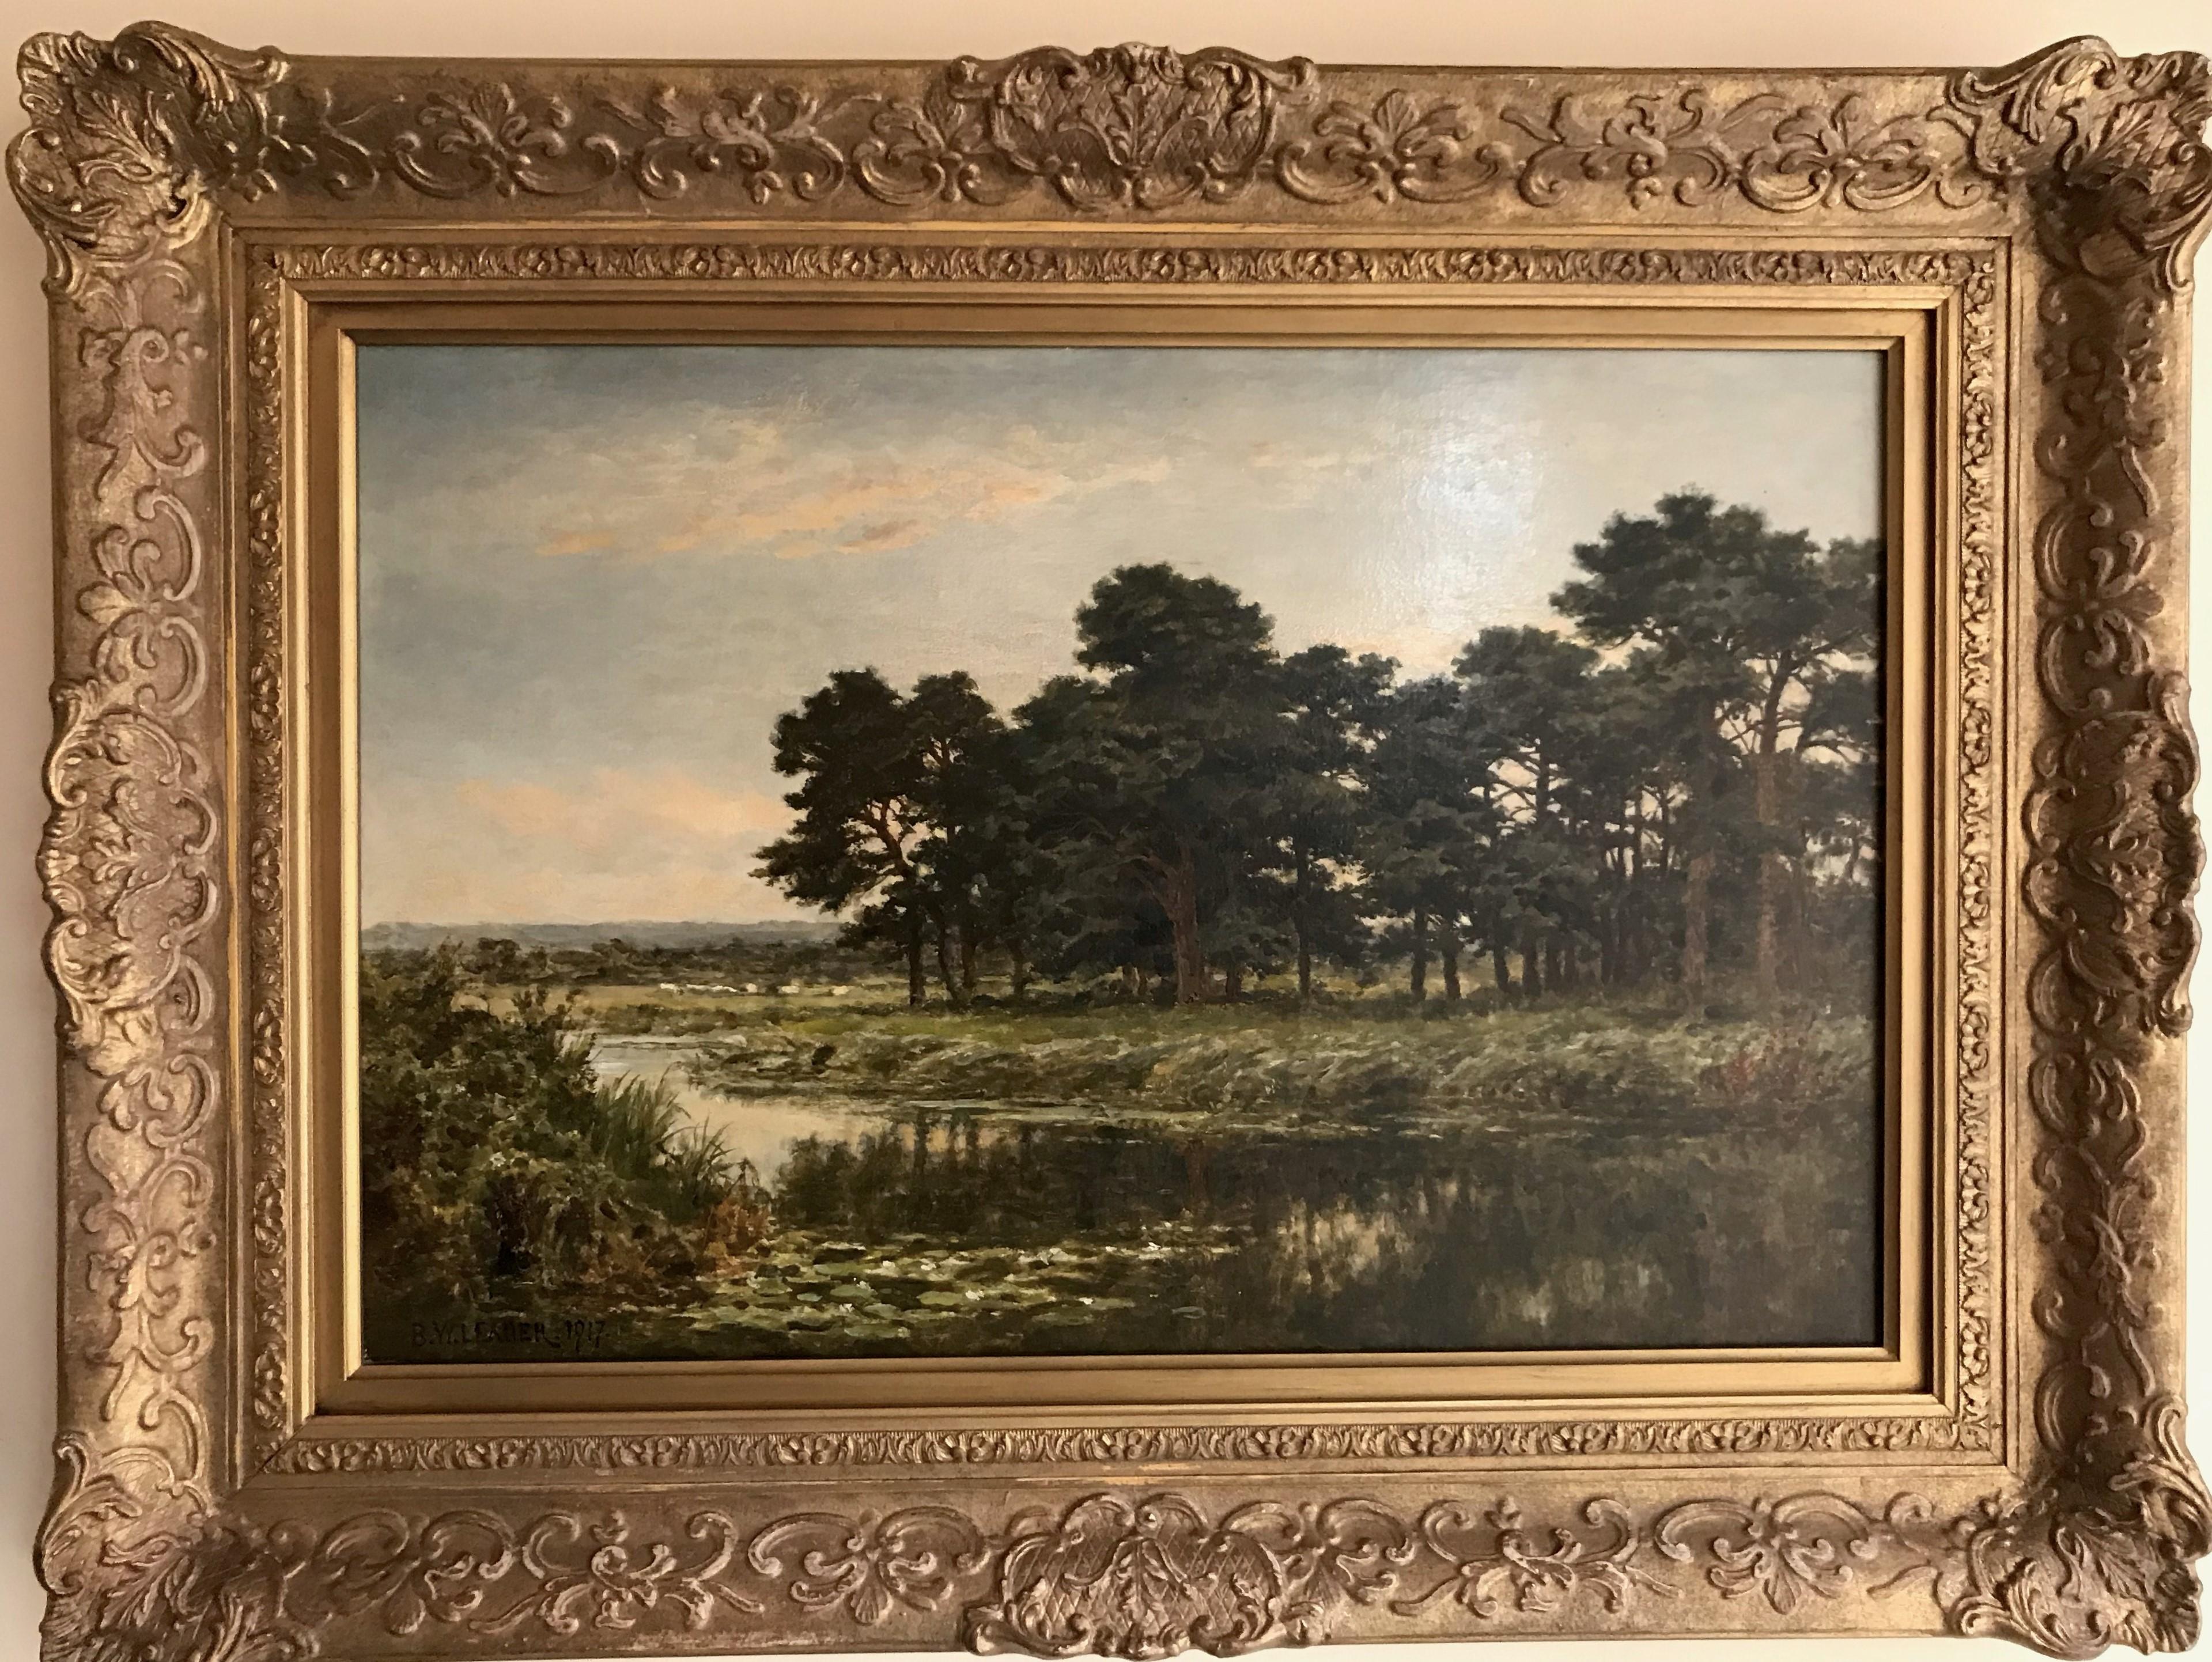 Oil  on canvas and framed and signed lower left and dated 1917.    23" x 31" and canvas size:  15.5" x 23.5"

Bio:  
Photo of Benjamin Williams Leader
Benjamin Williams Leader RA (12 March 1831 - 22 March 1923) was an English landscape painter.